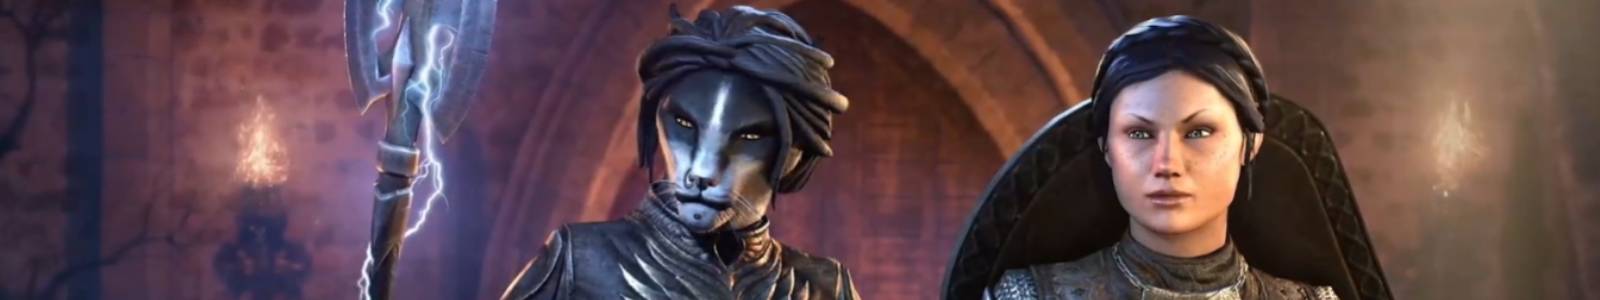 The Best Ember The Khajiit Leveling Guide for ESO header